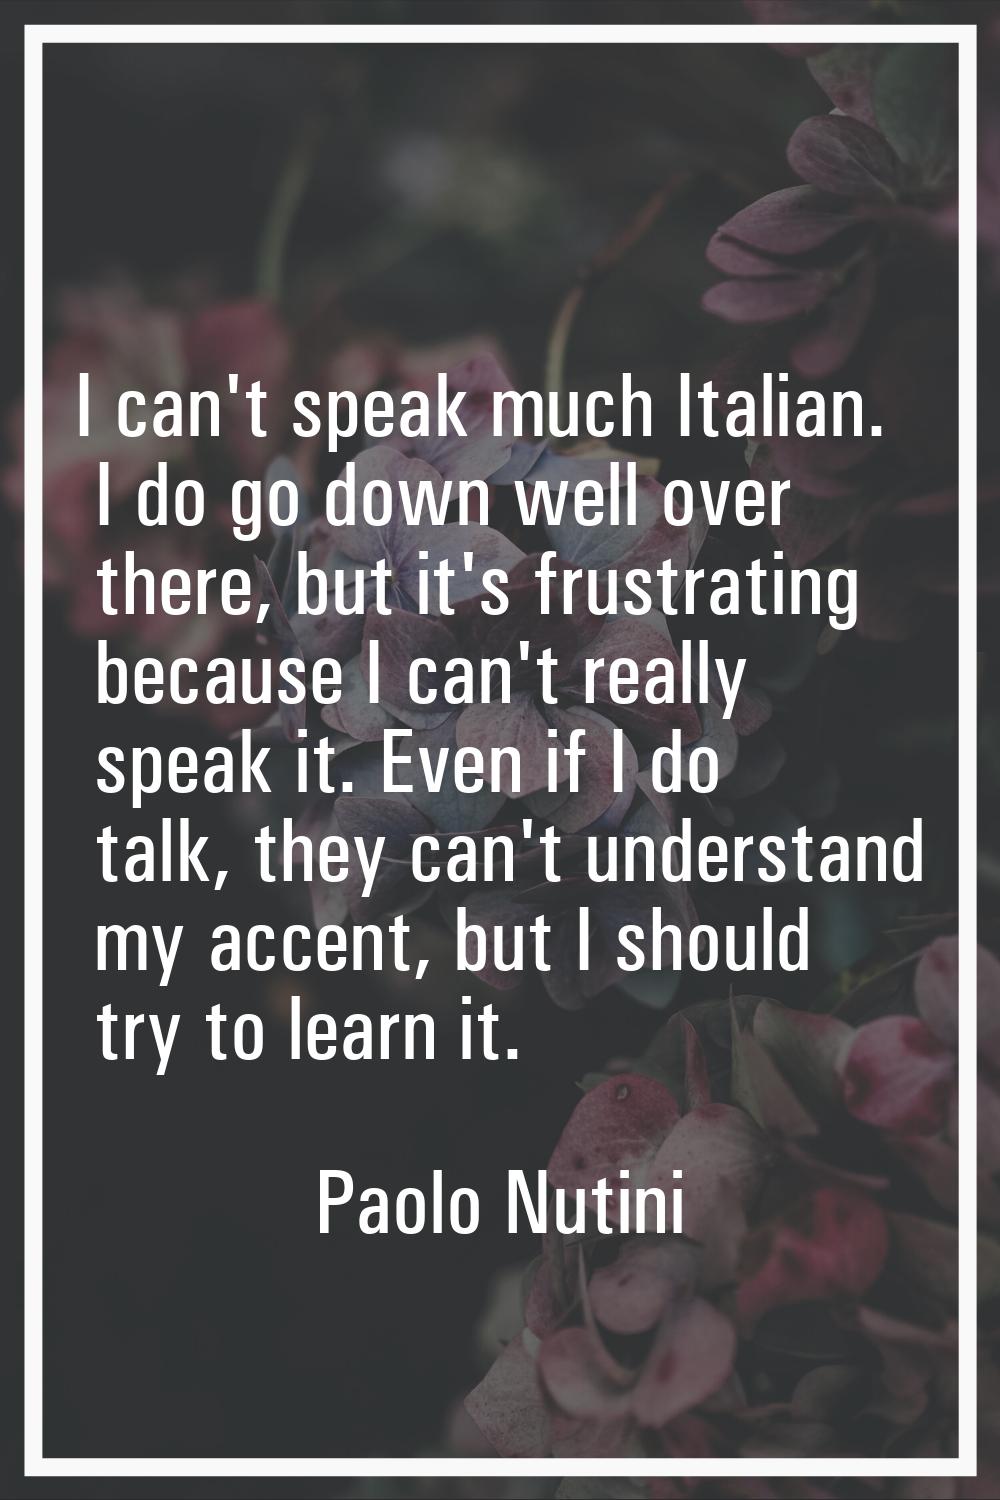 I can't speak much Italian. I do go down well over there, but it's frustrating because I can't real